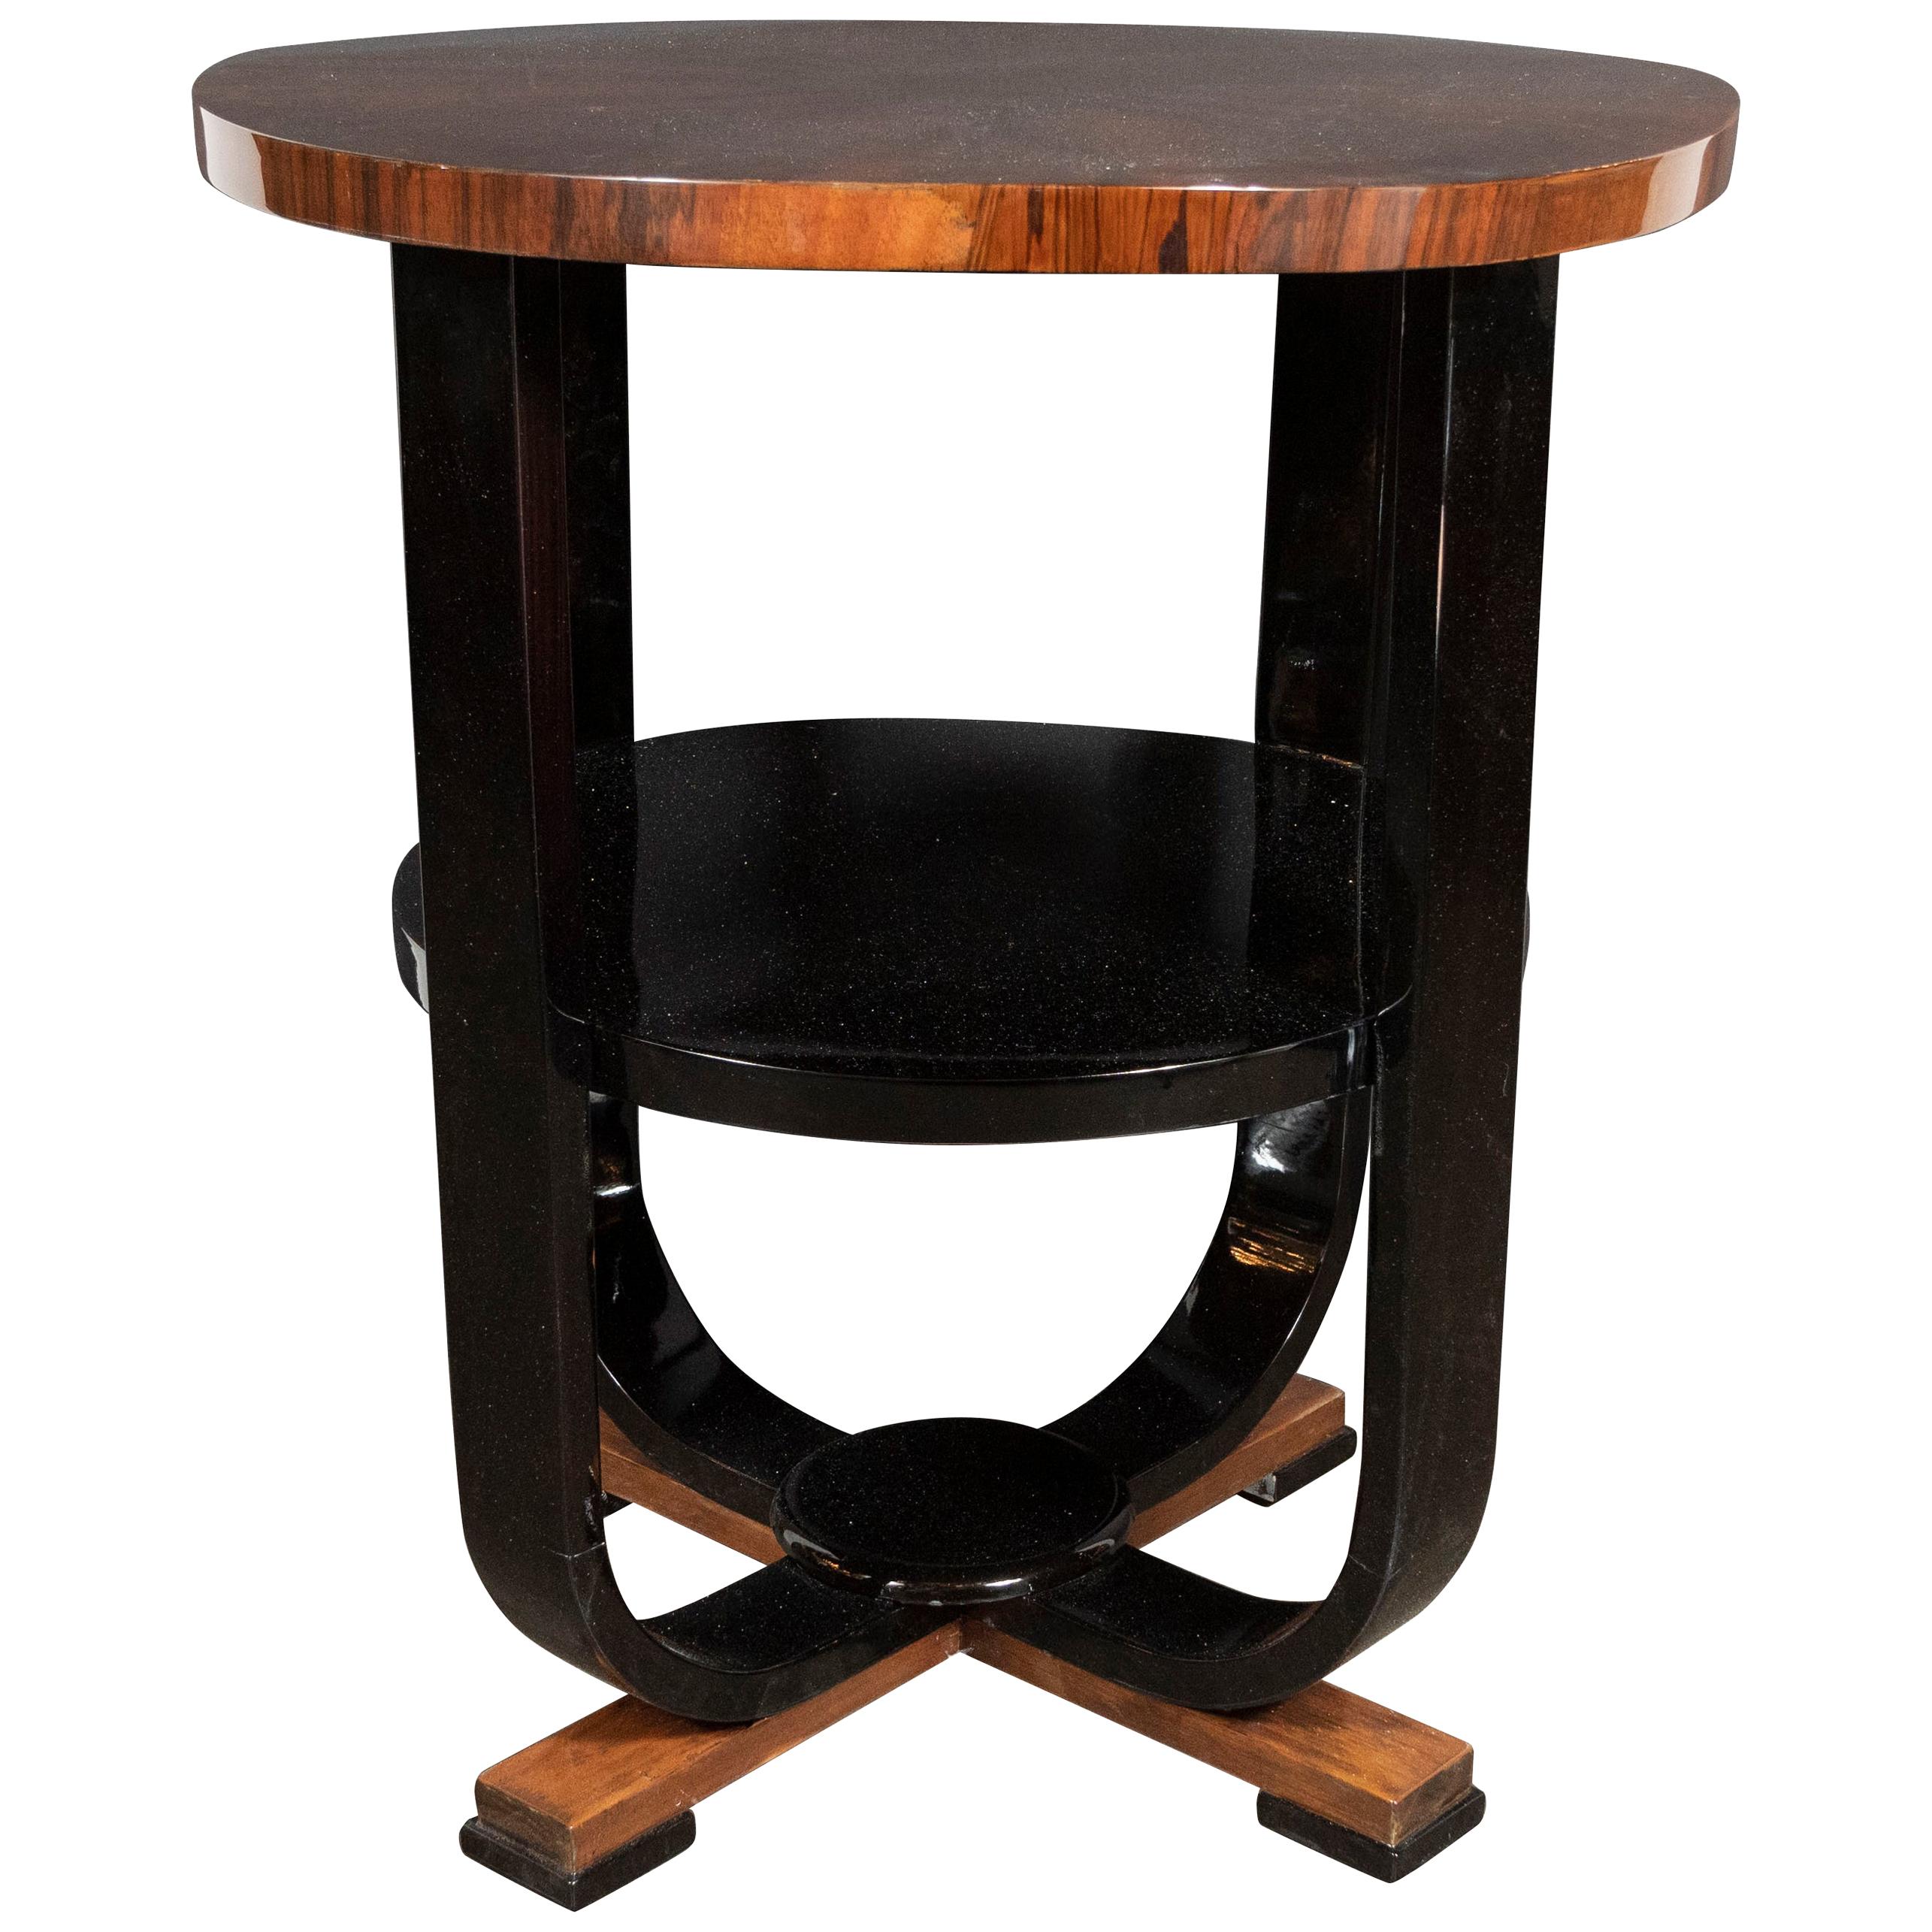 Art Deco Skyscraper Style Lacquer & Bookmatched Walnut Two-Tier Gueridon Table